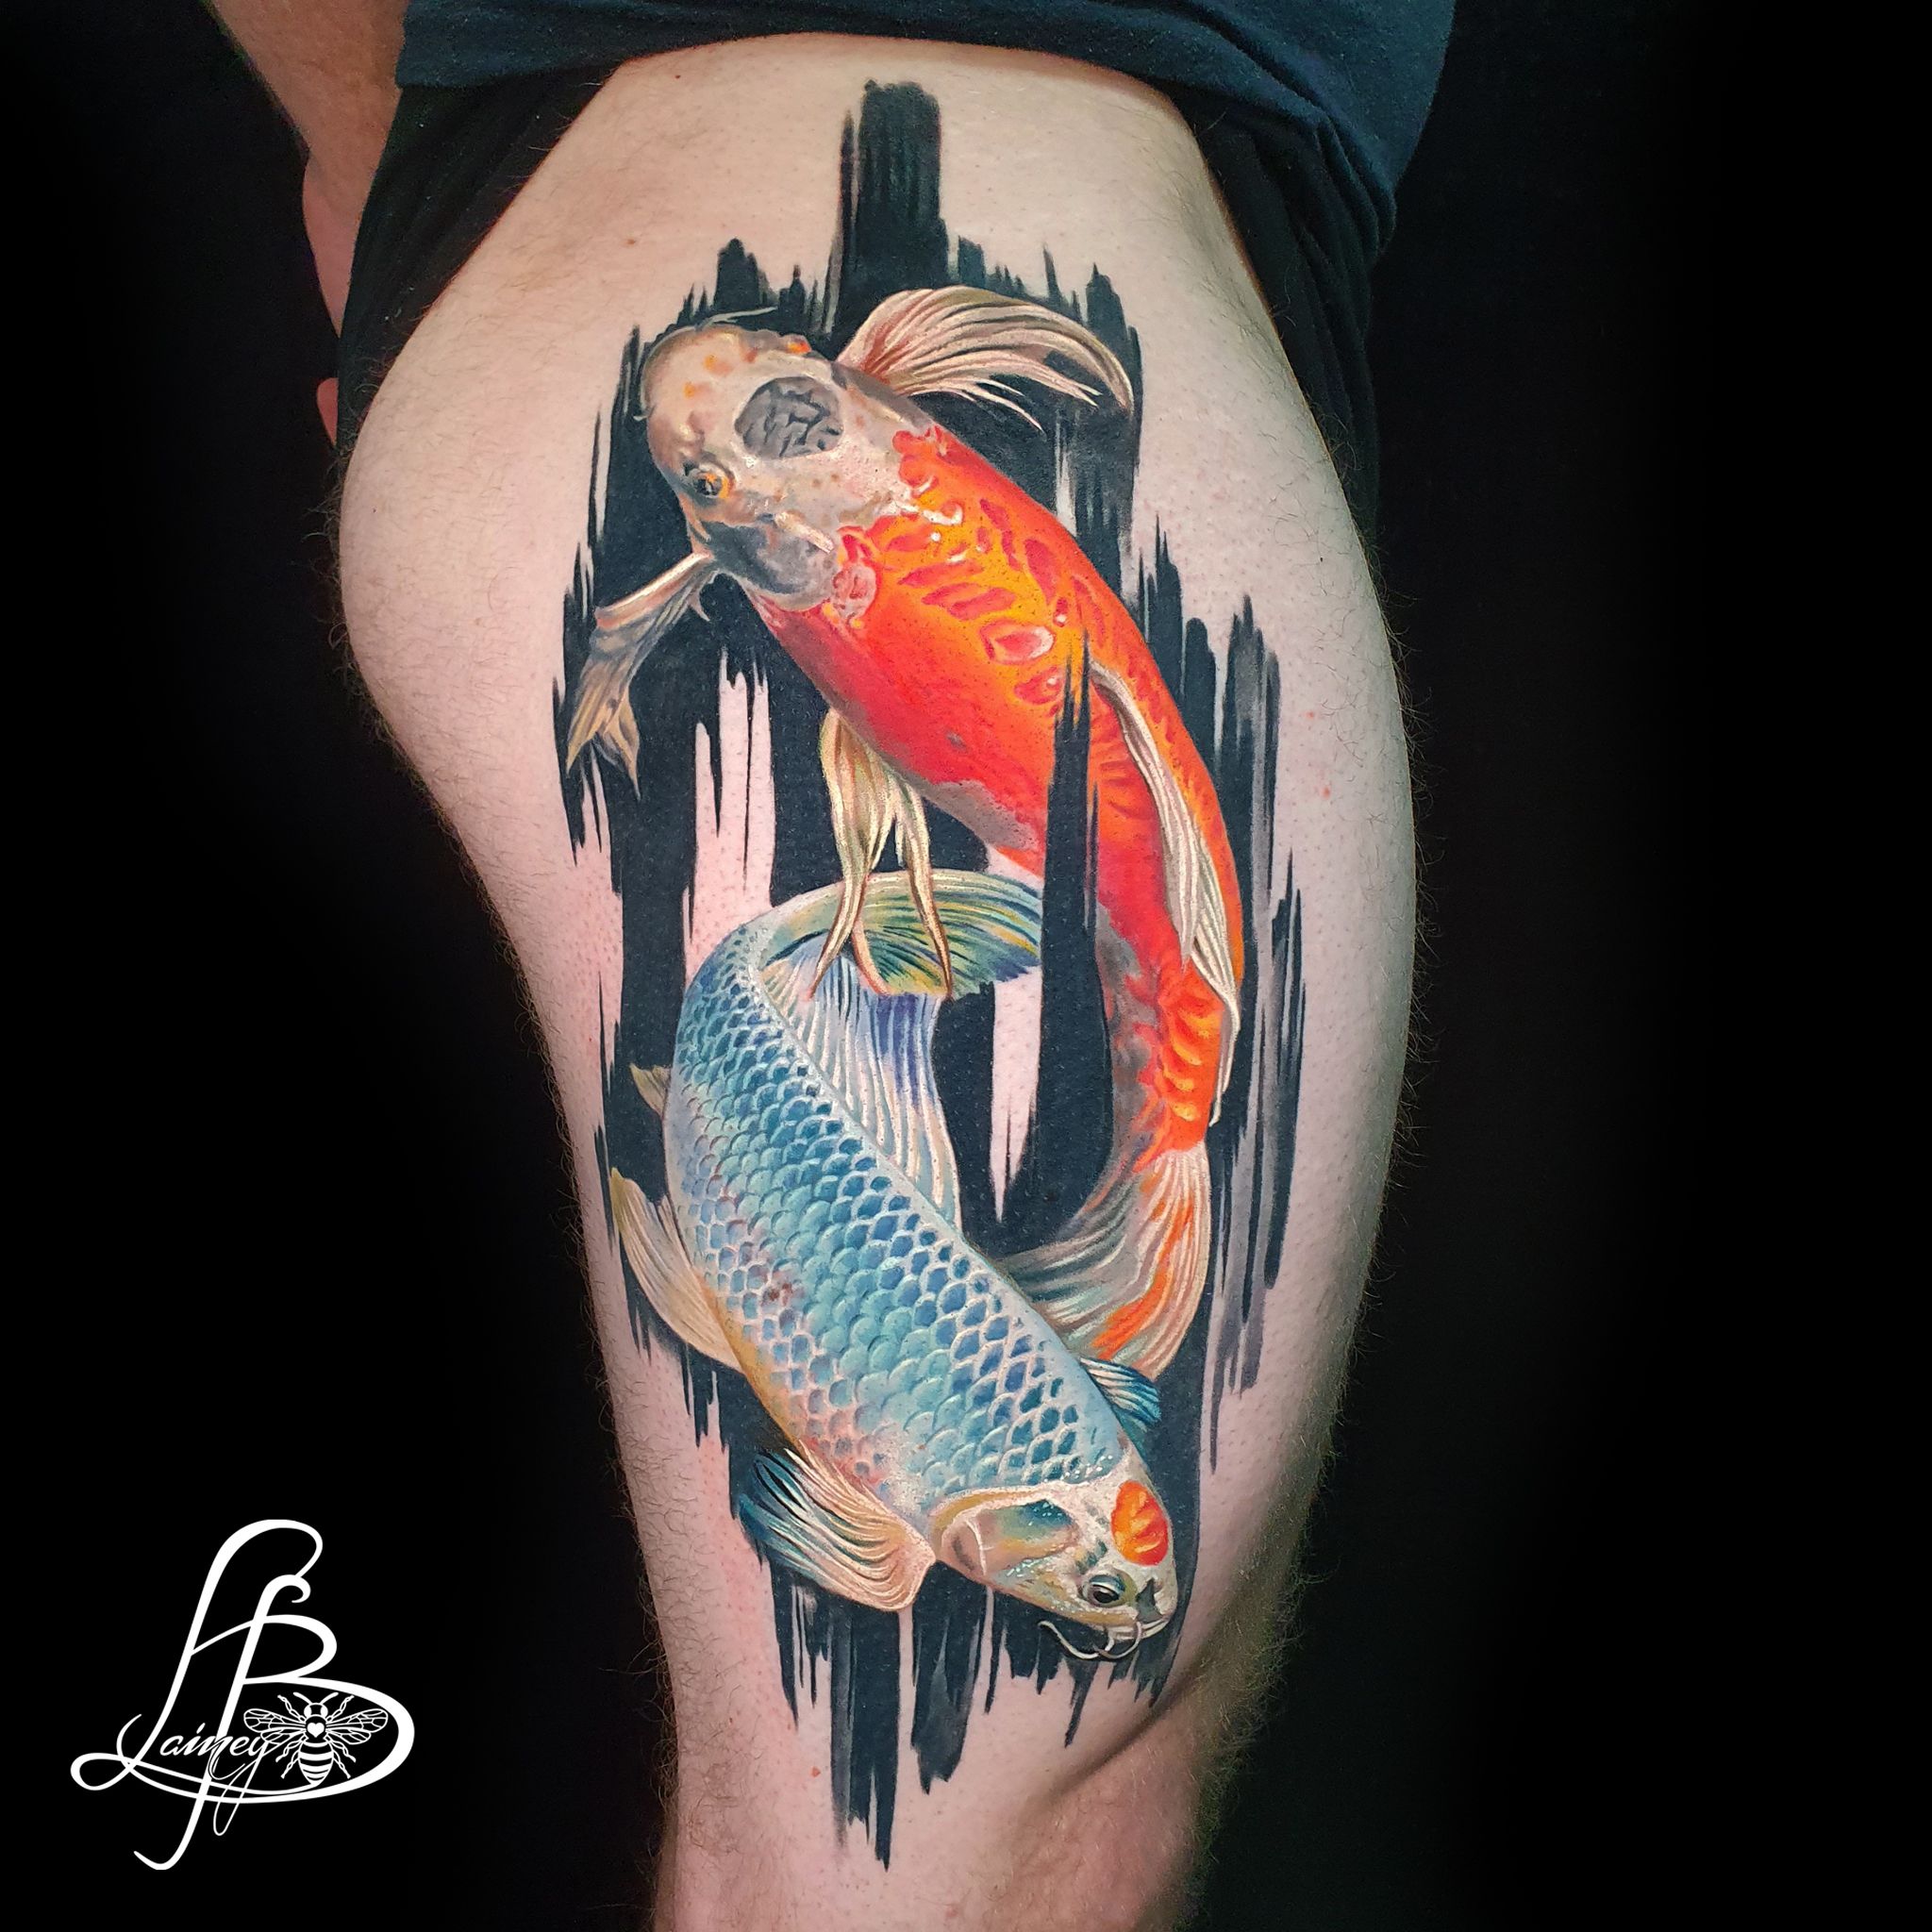 Lucky 7 Tattoo and Piercing: Tattooing is His Career, Fly Fishing His  Mistress